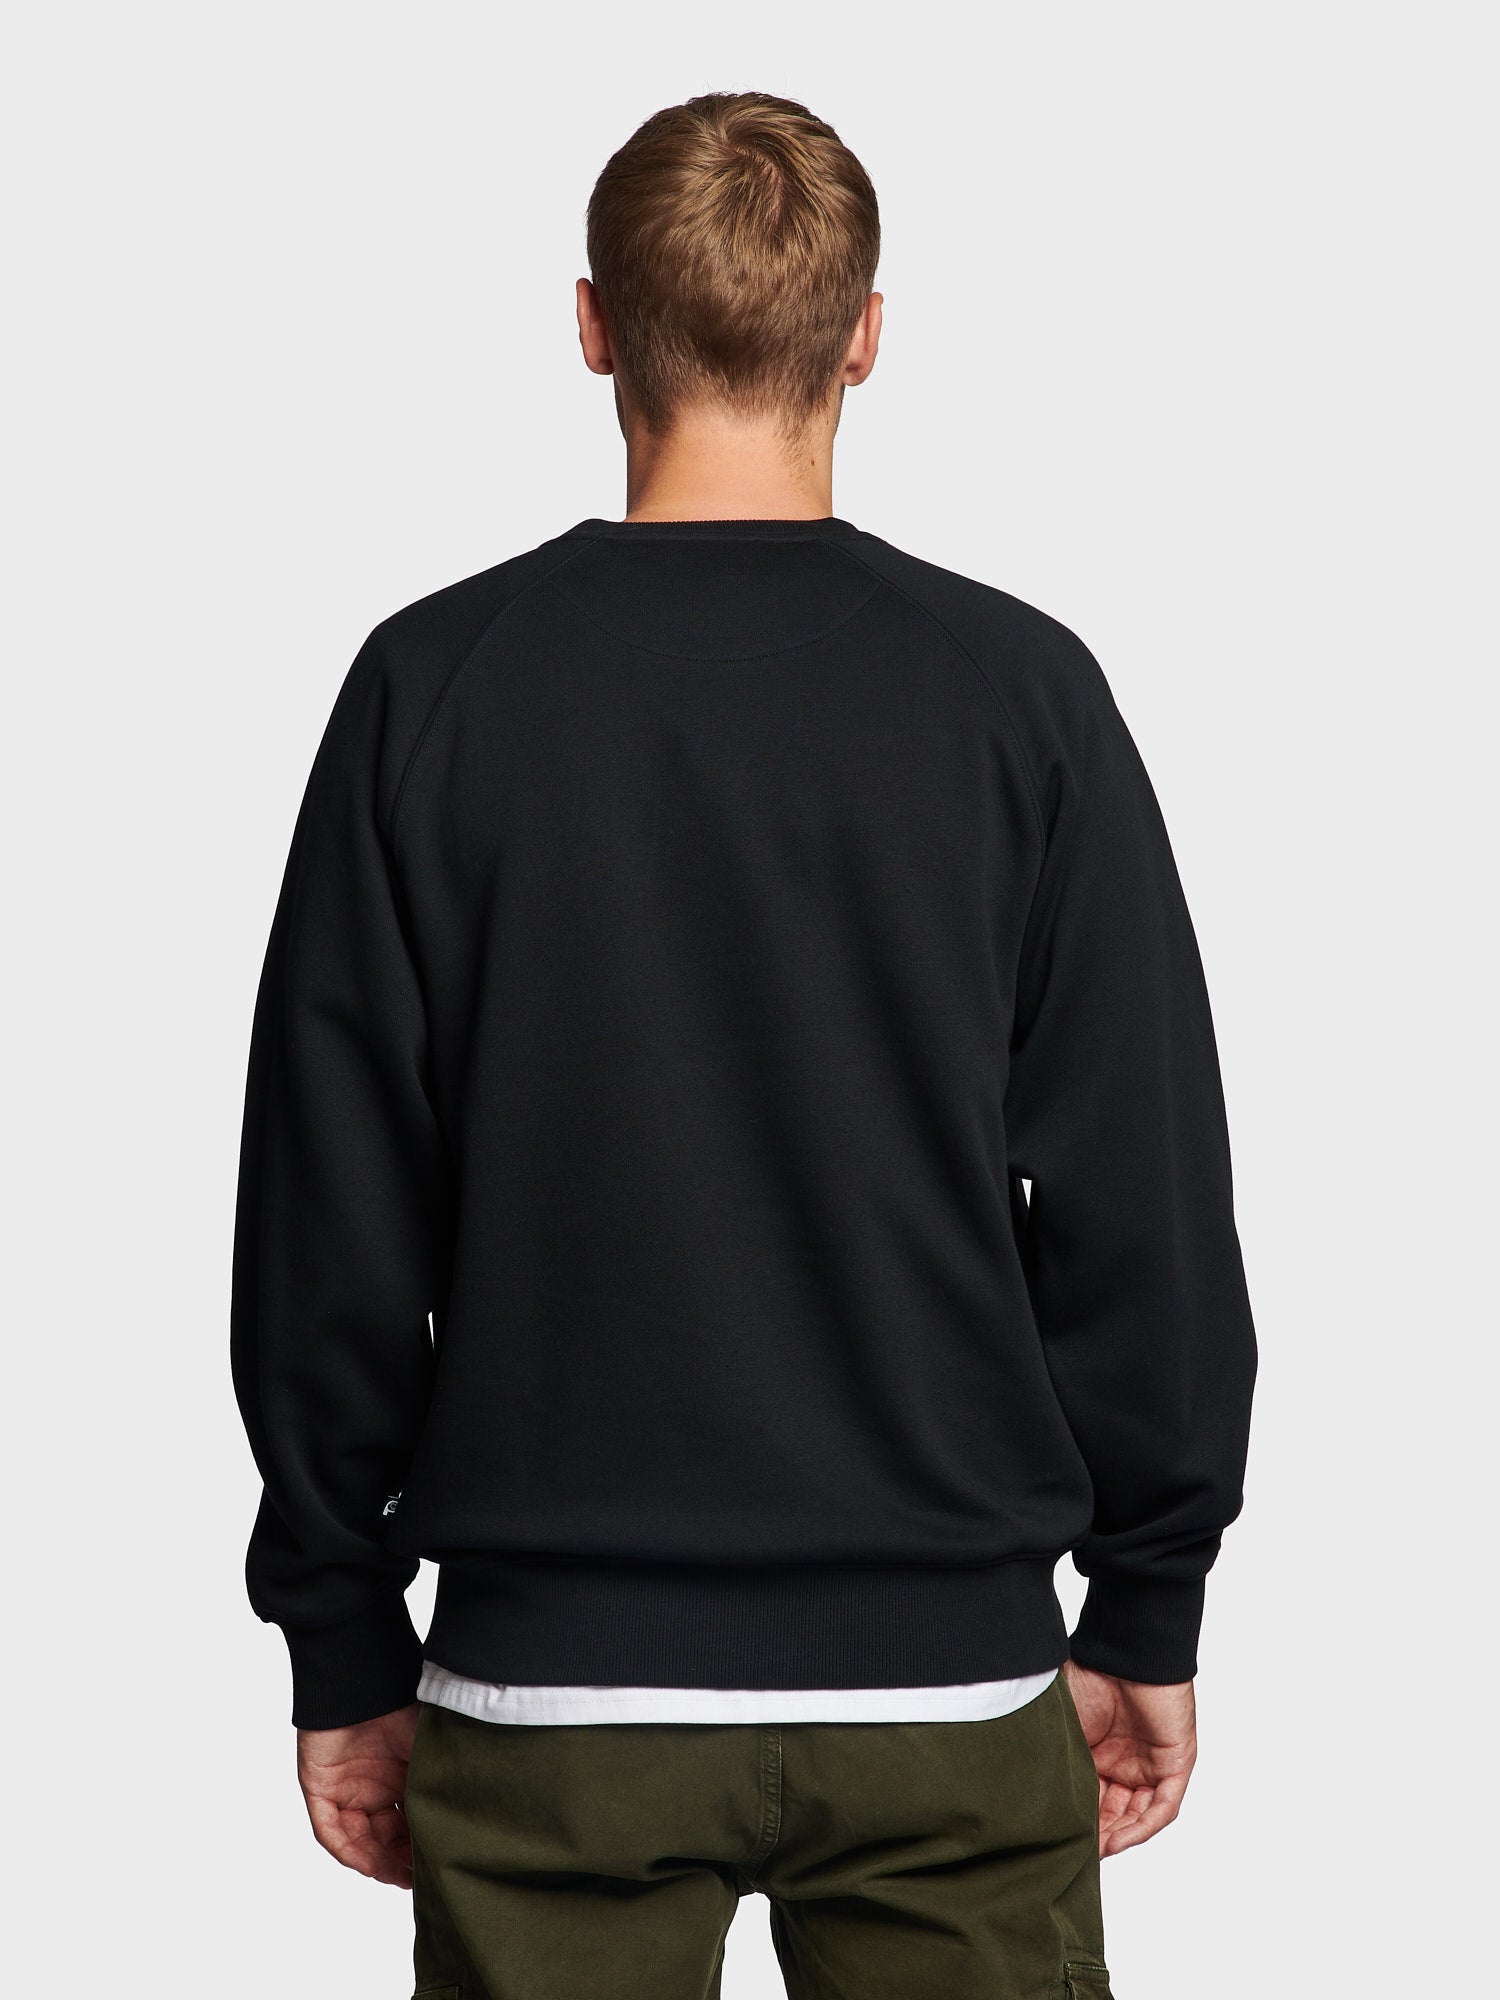 Embroidered Crew Neck Sweater in Black